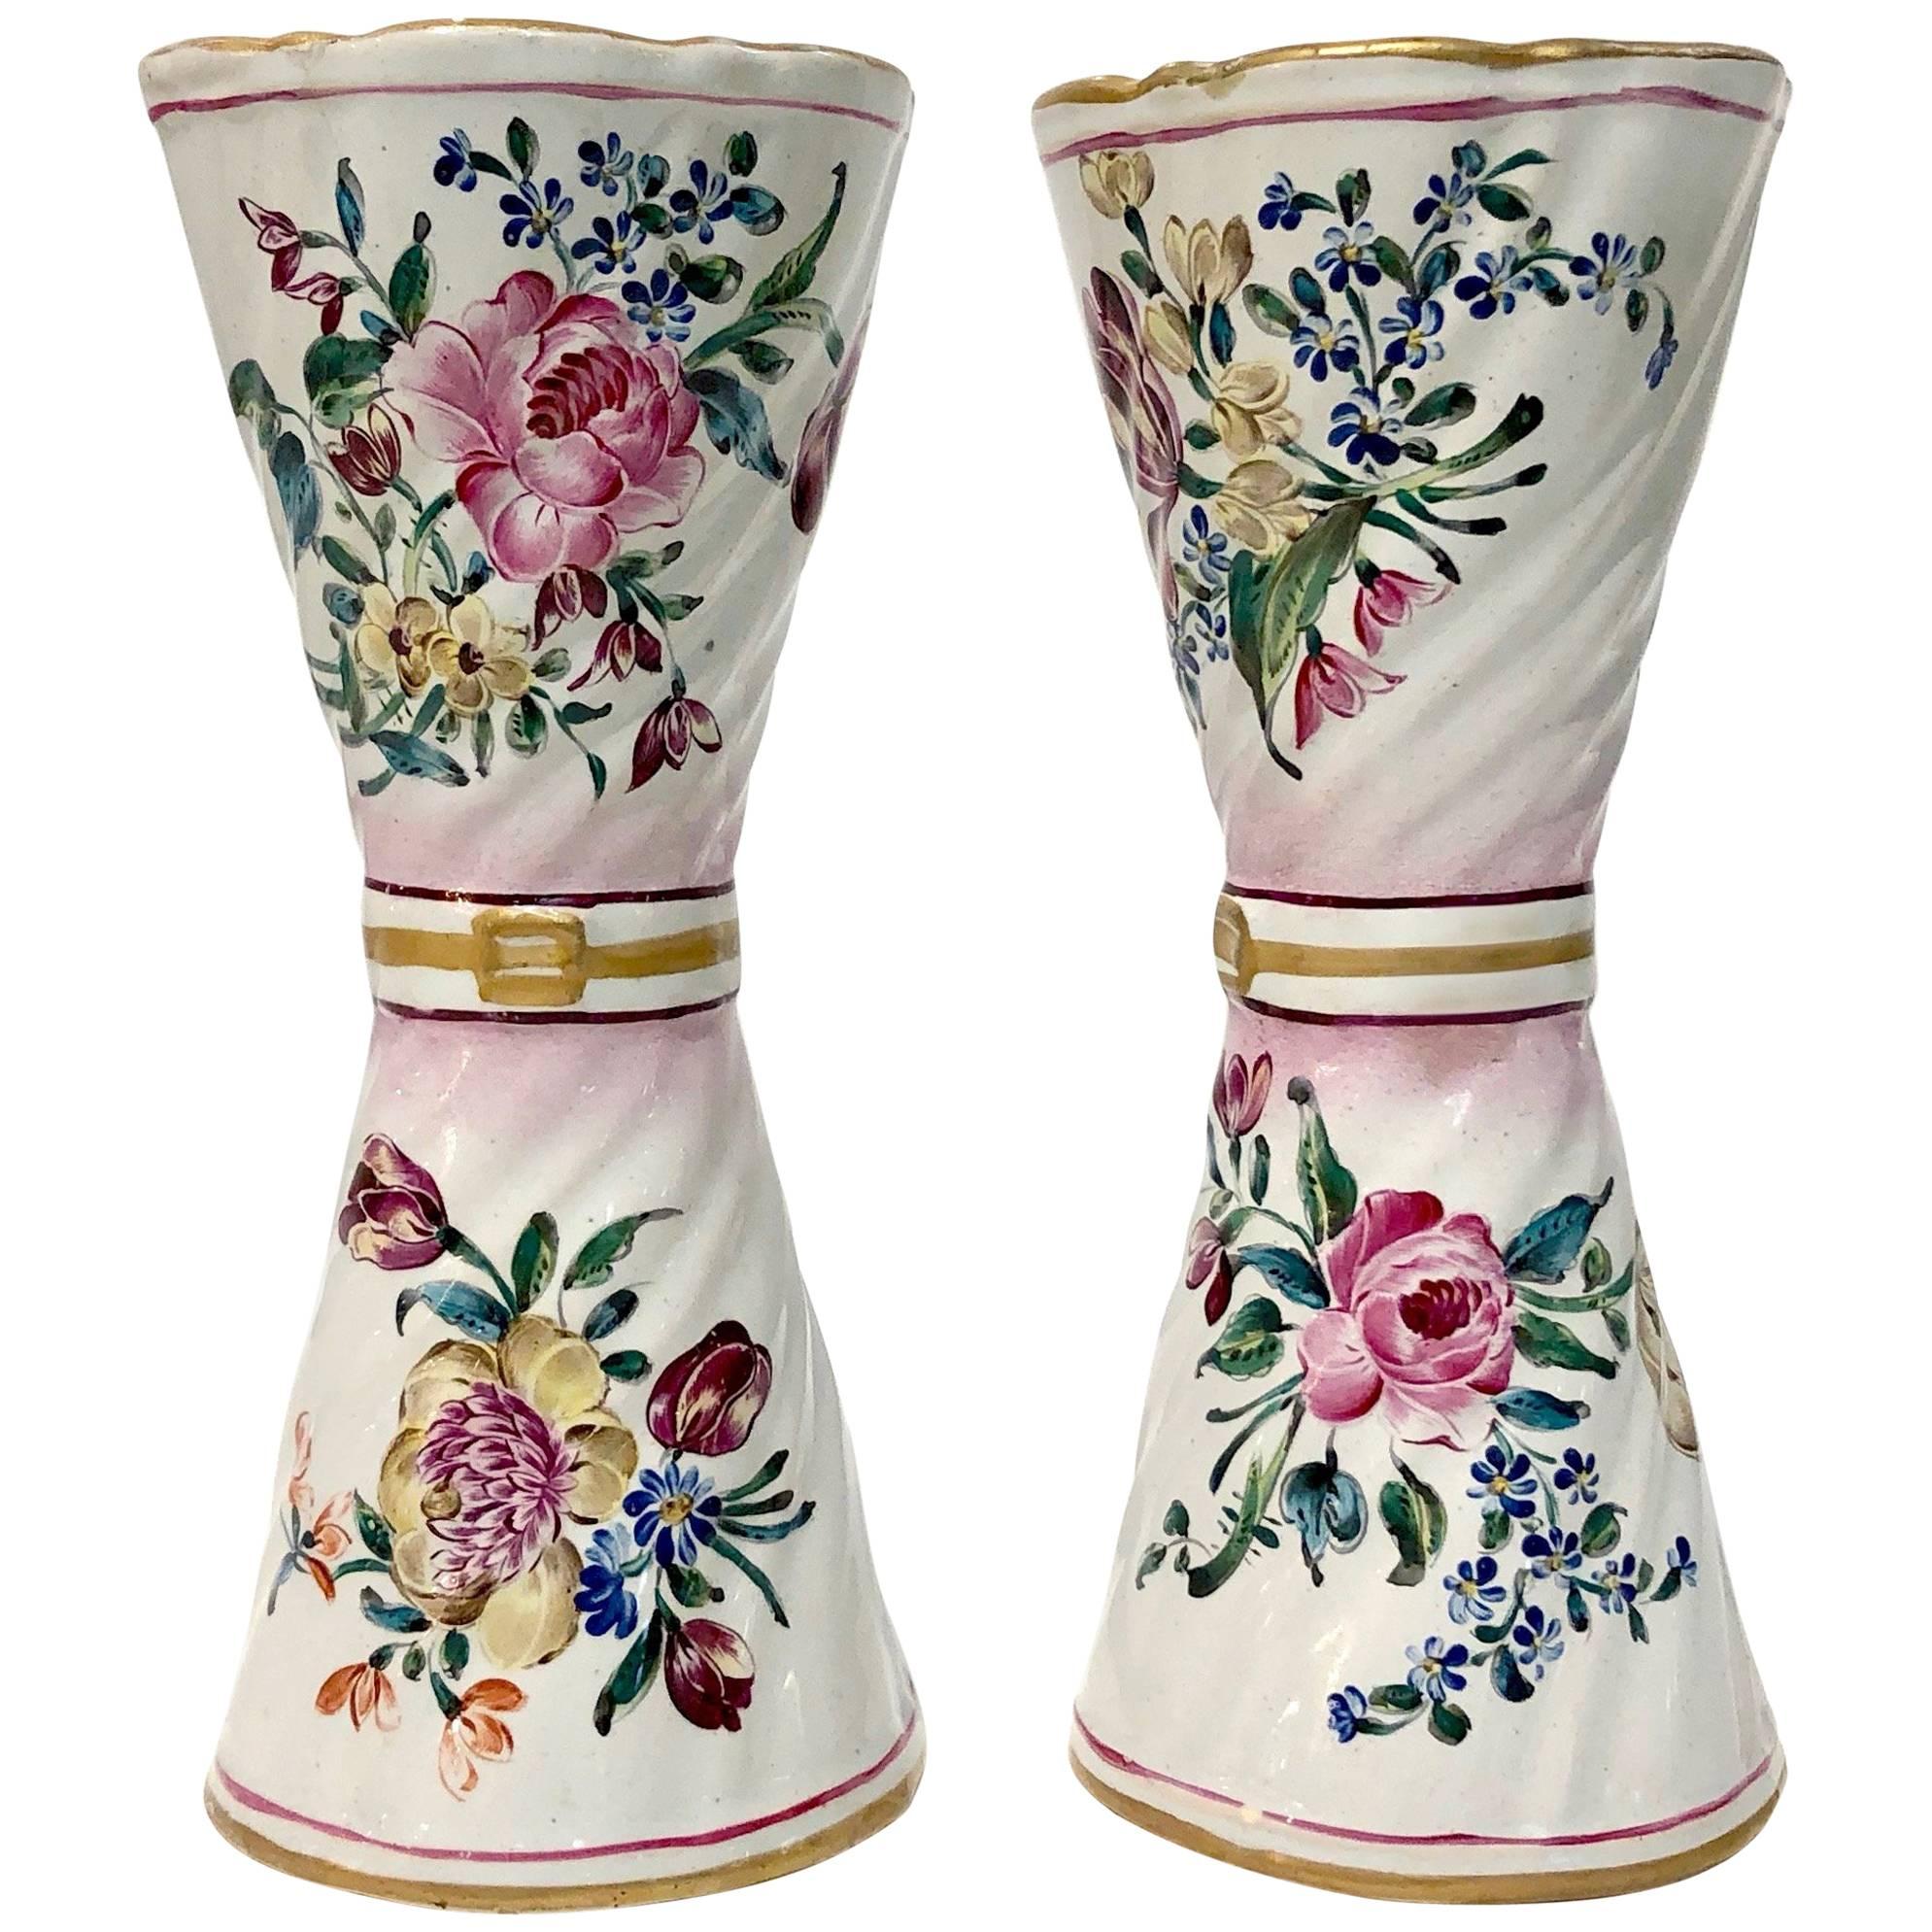 1870s St. Clement French Faience Majolica Pair of White Pink Flower Vases For Sale